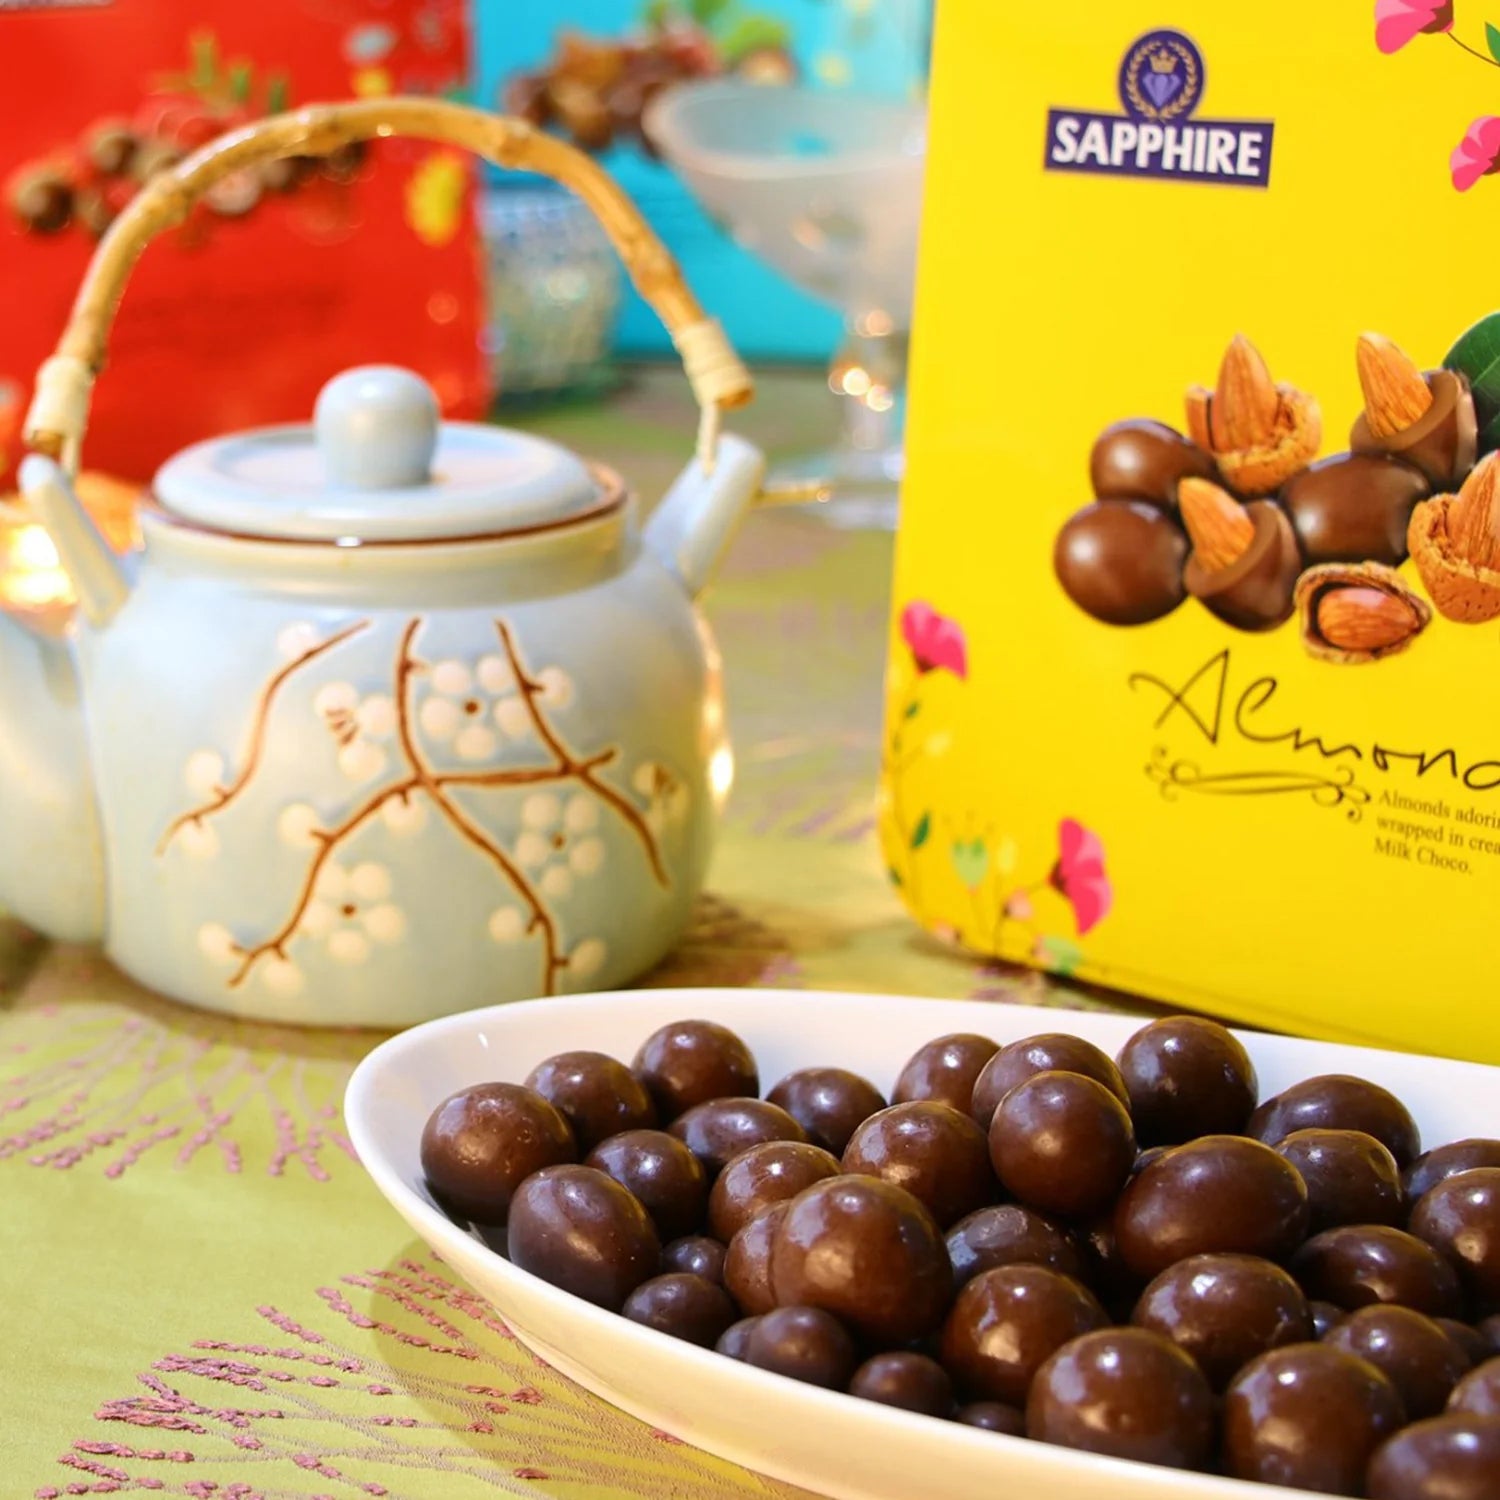 Sapphire Almonds Covered in Milk Chocolate, 200g (Imported) - Super 7 Mart